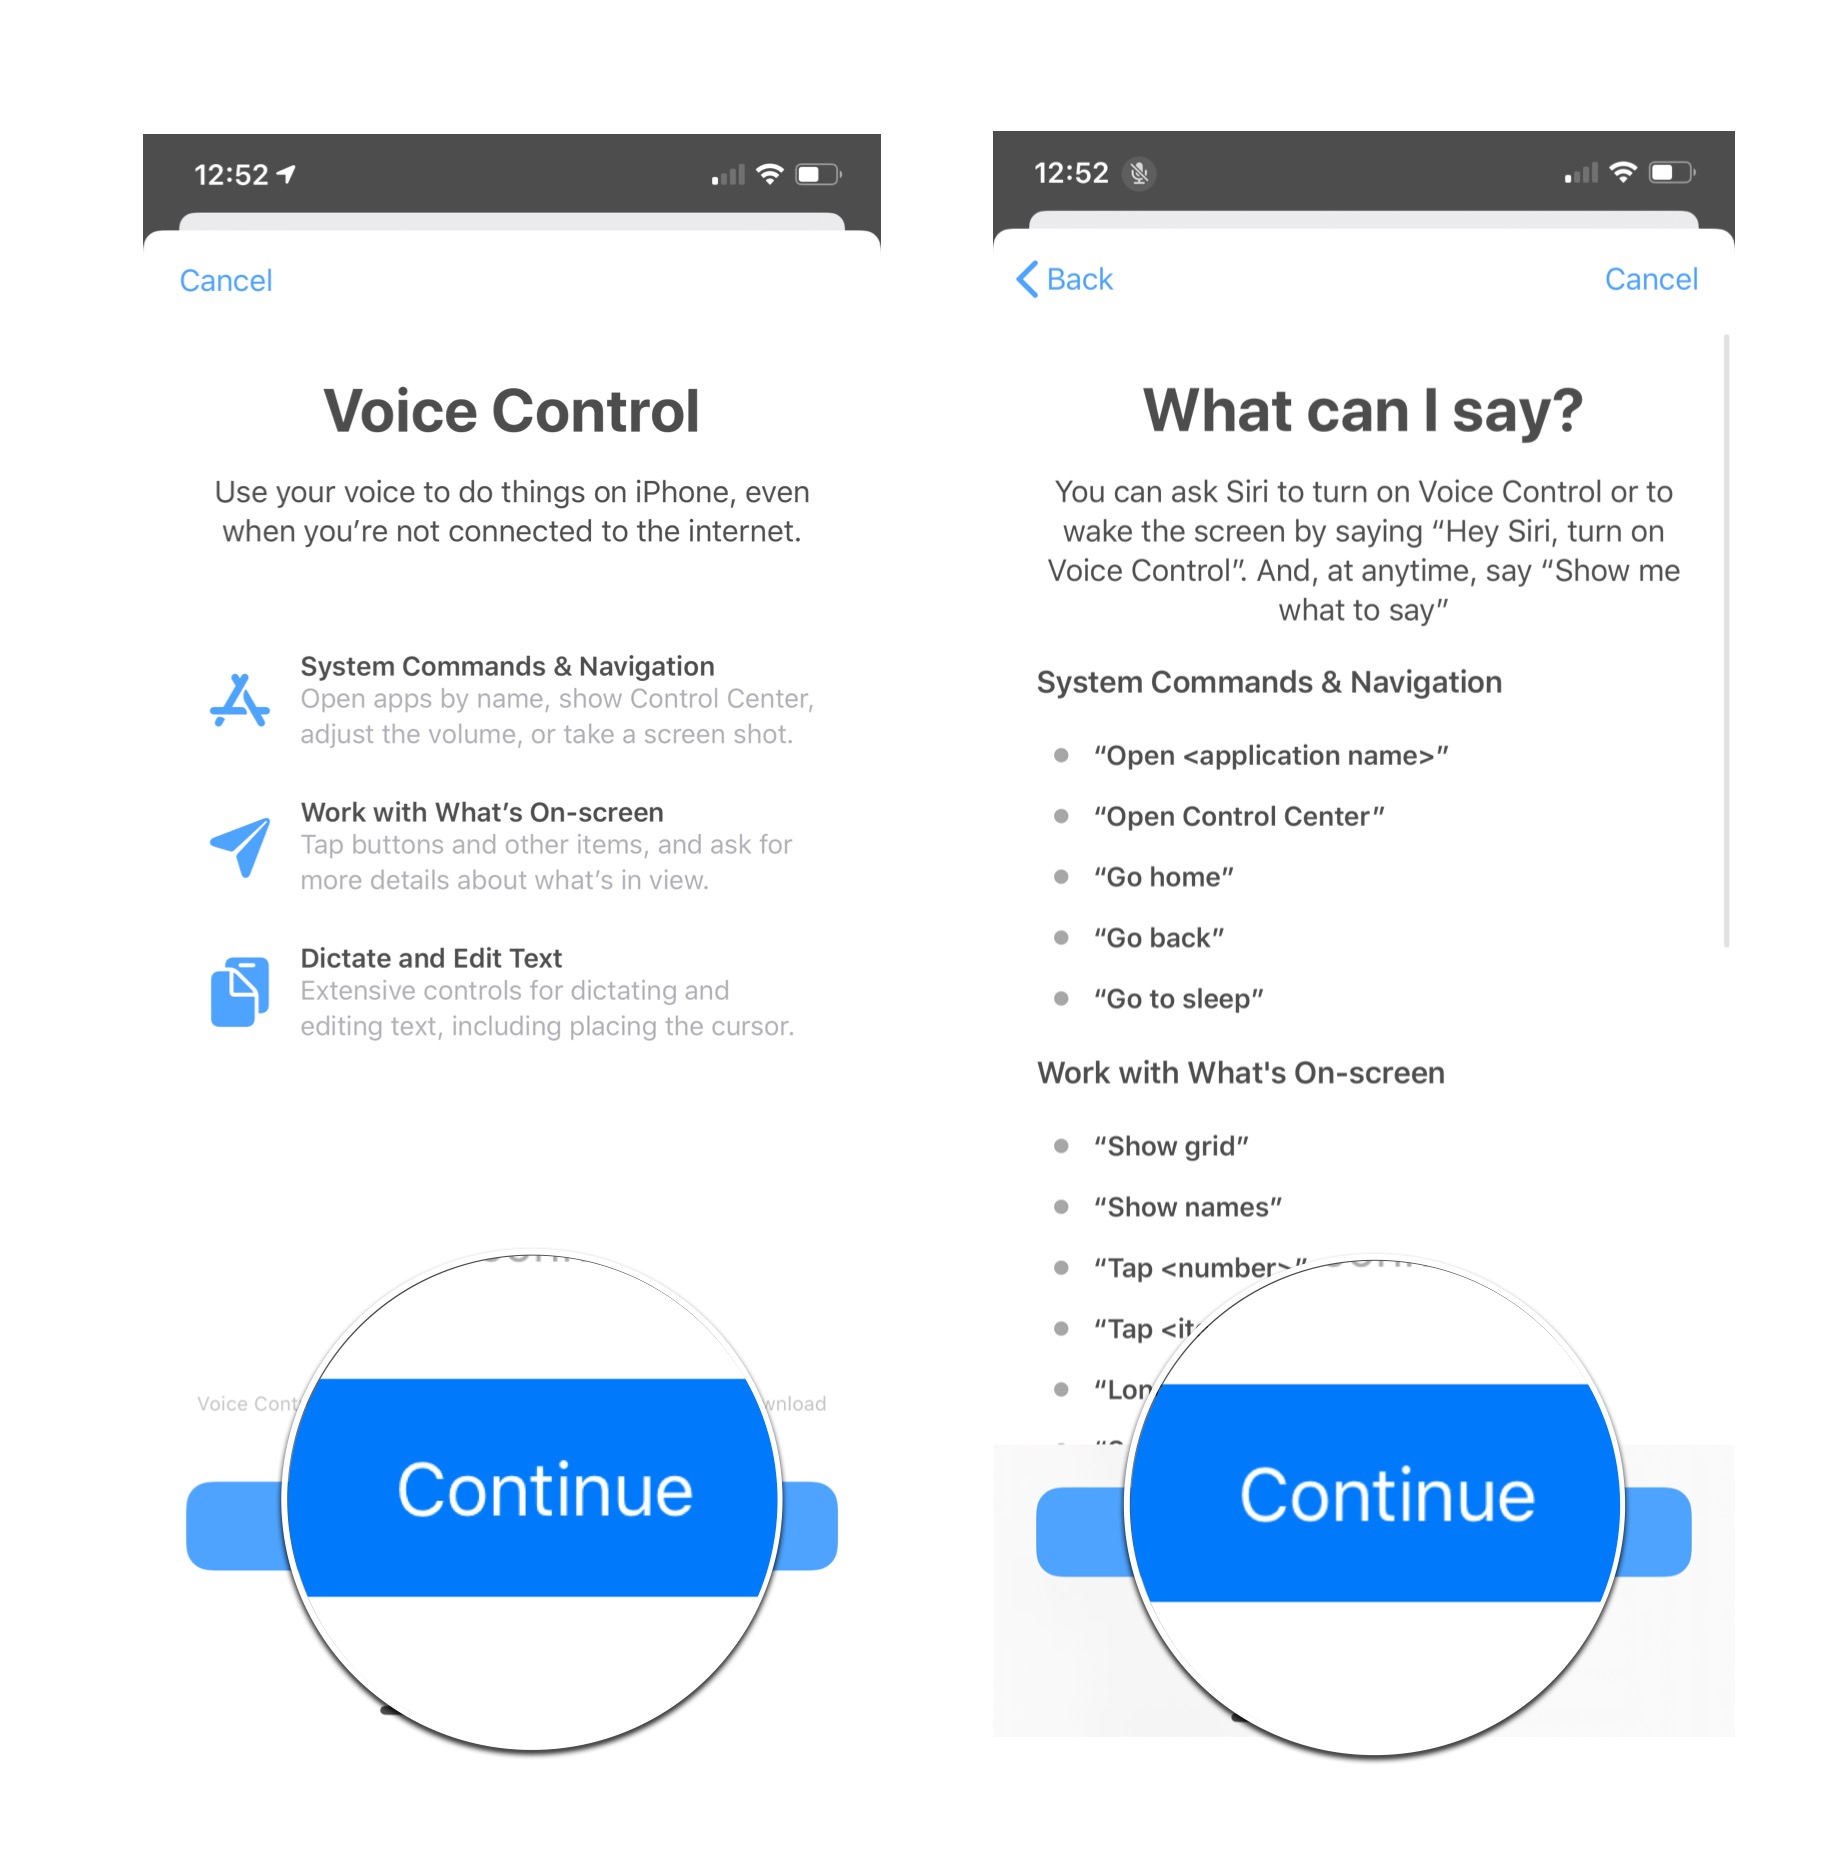 Set up Voice Control: Tap continue and then tap continue again.